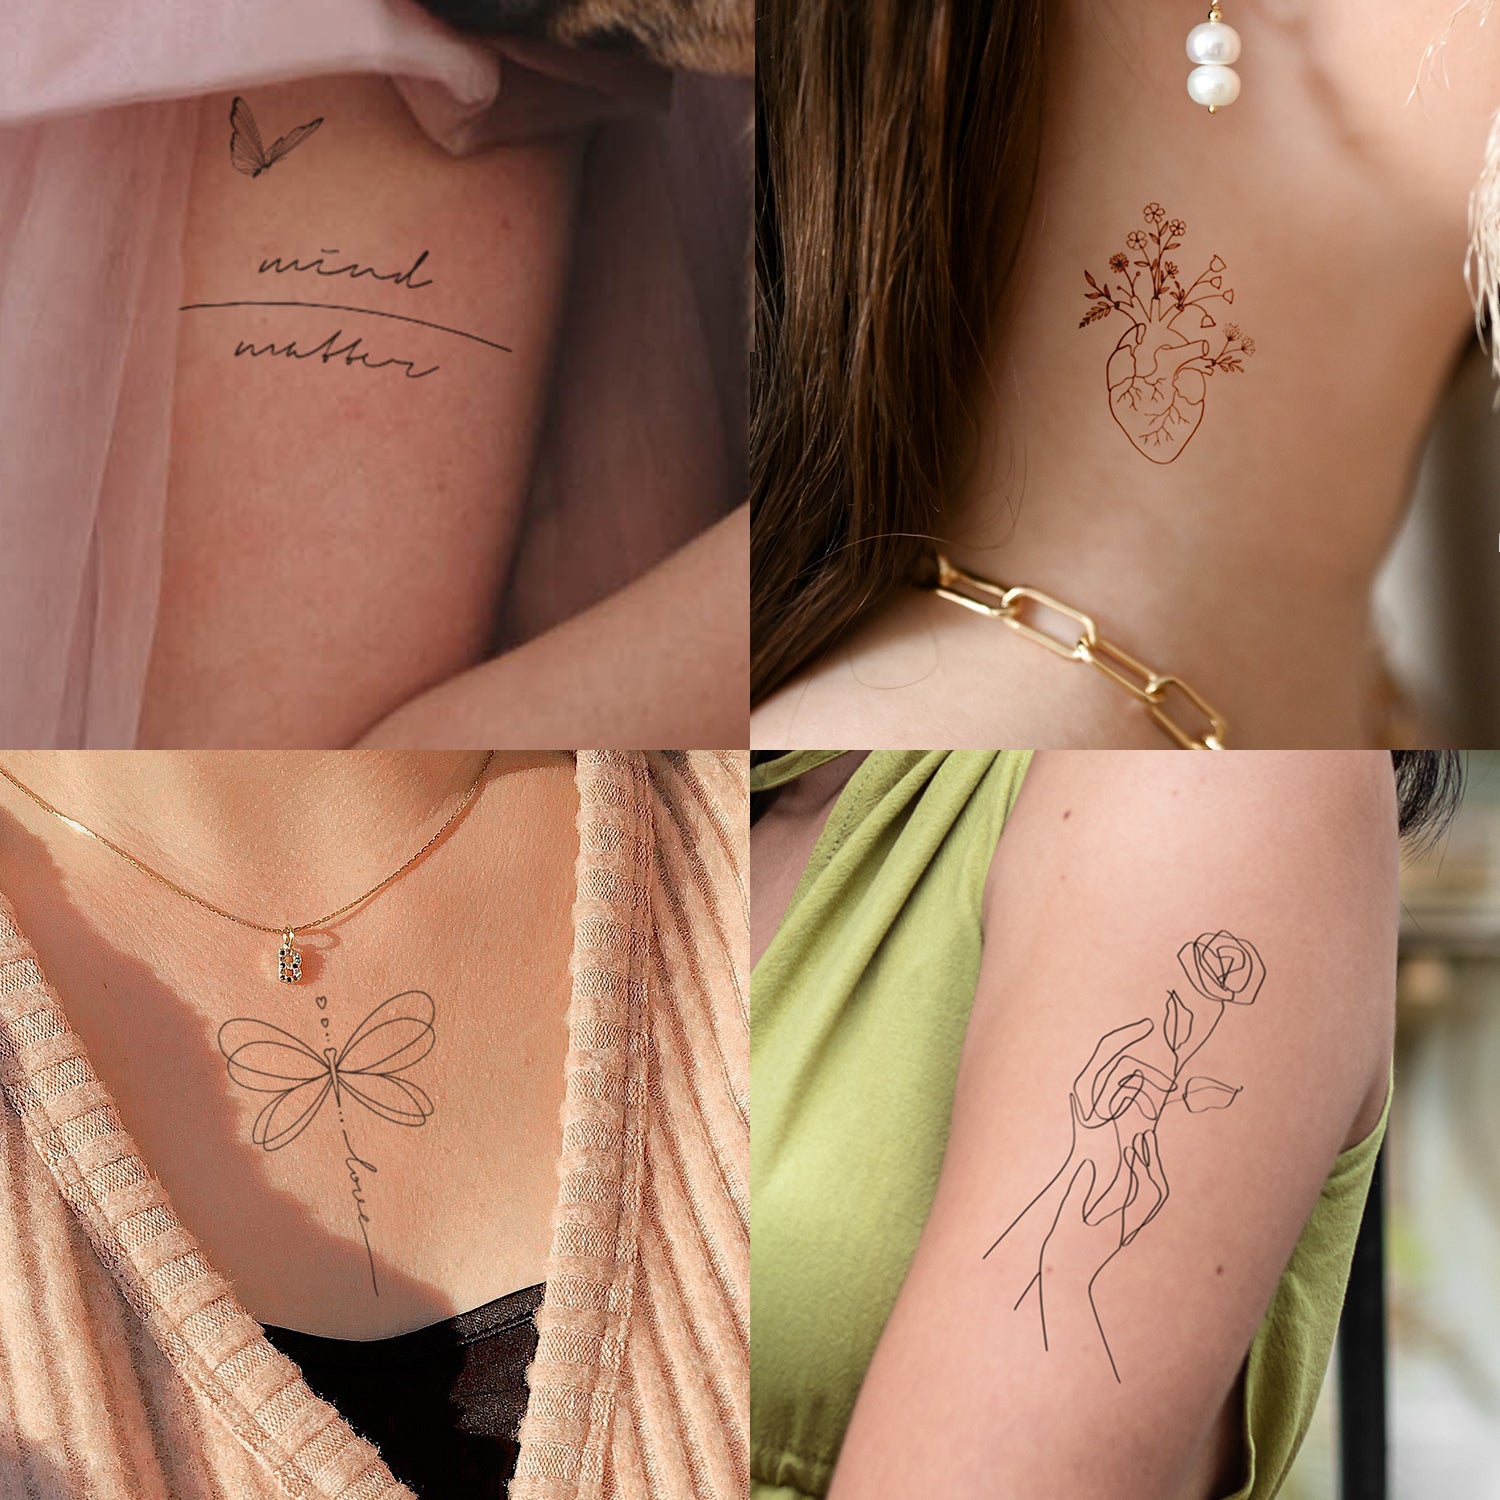 meaningful words quotes tattoos simple minimal tattoo ideas cute sexy chest neck arm tattoo design mental health fake tattoos female